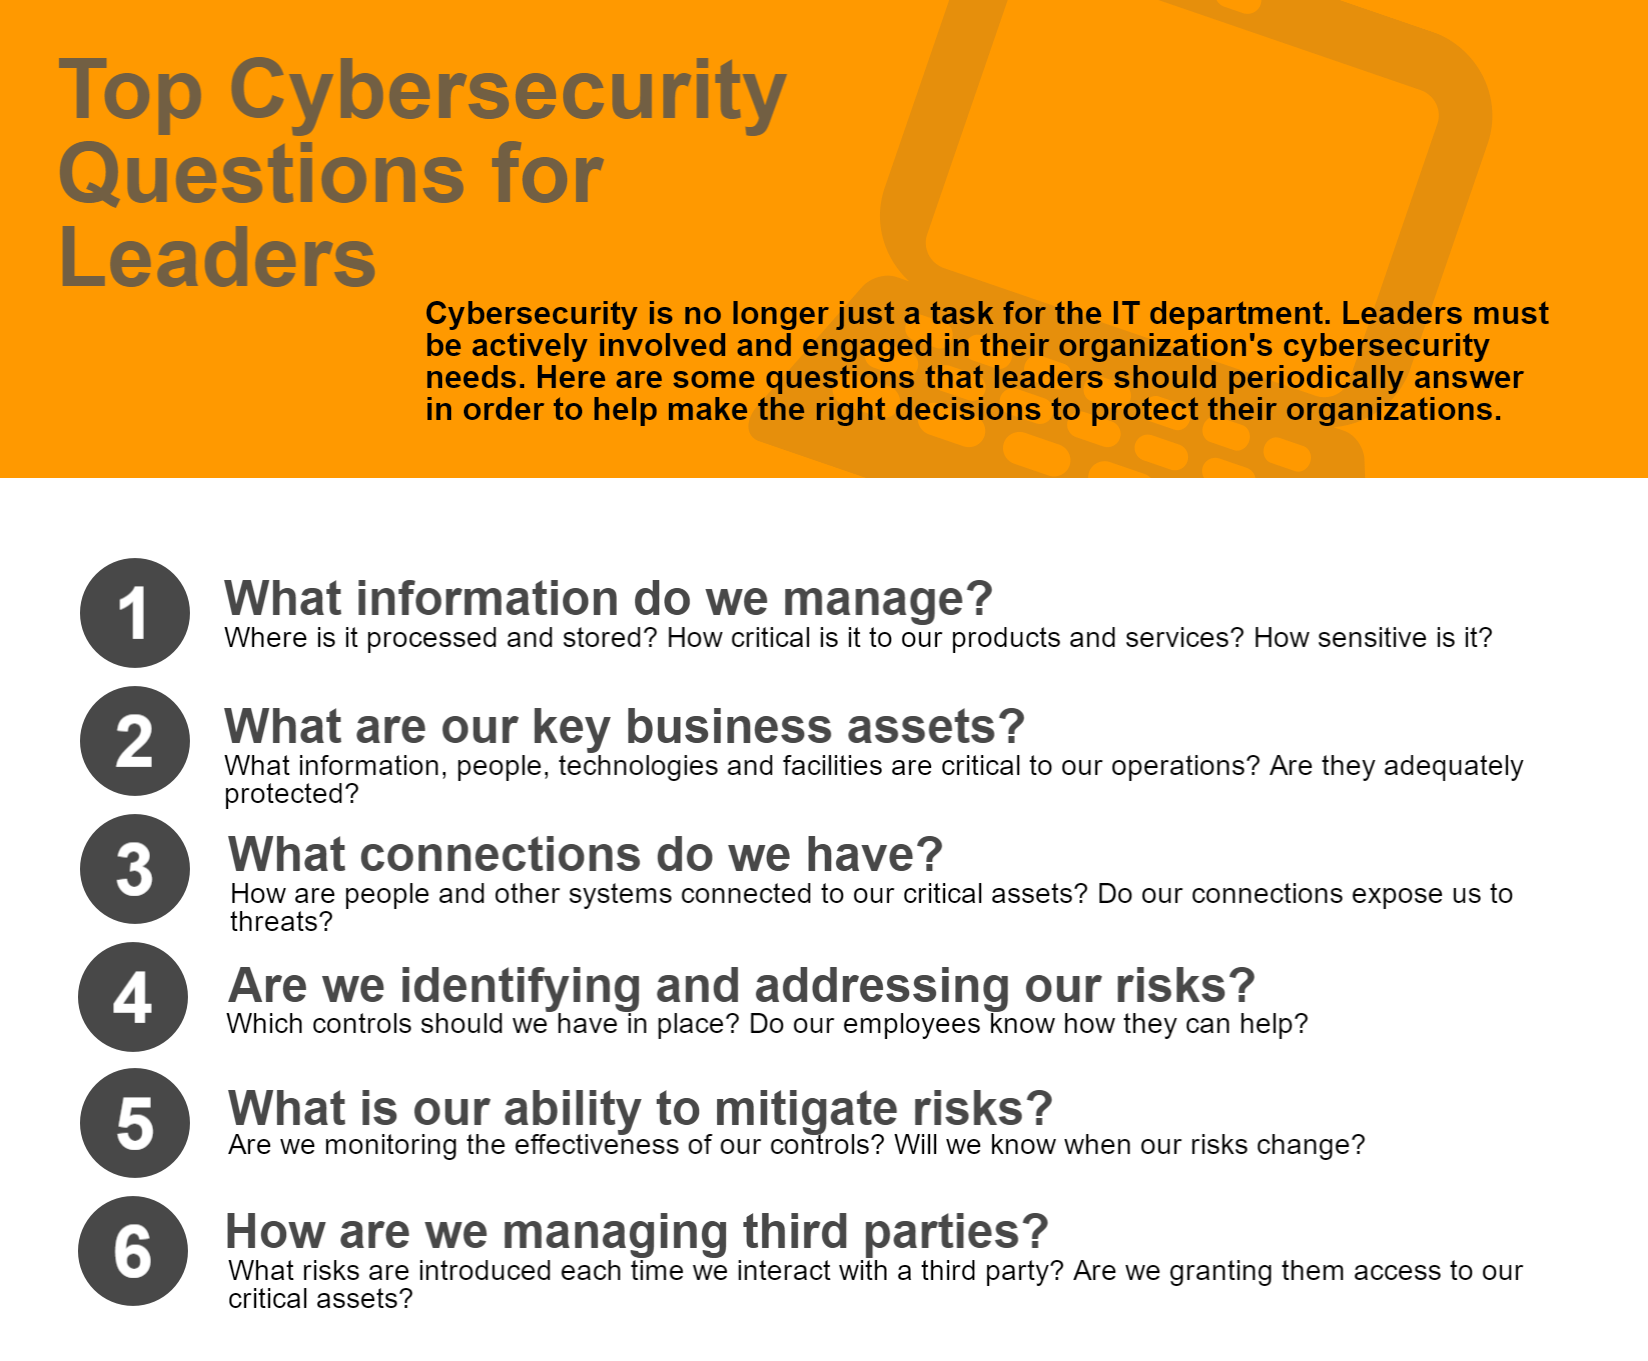 Top cybersecurity questions for leaders infographic